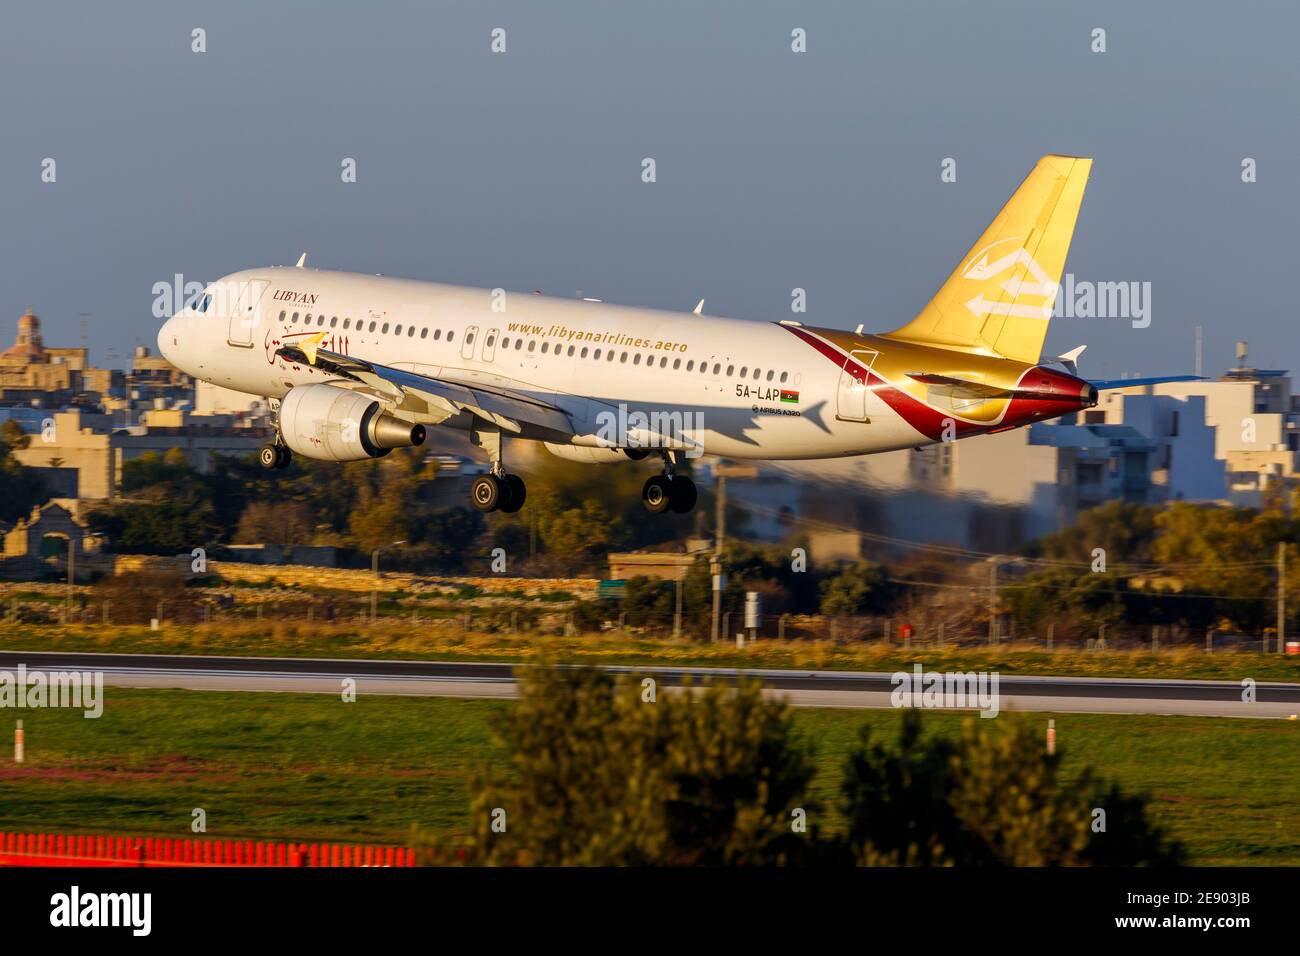 Libyan Airlines Airbus A320-214 (Reg: 5A-LAP) arriving in the late evening from Tripoli, Libya. Stock Photo